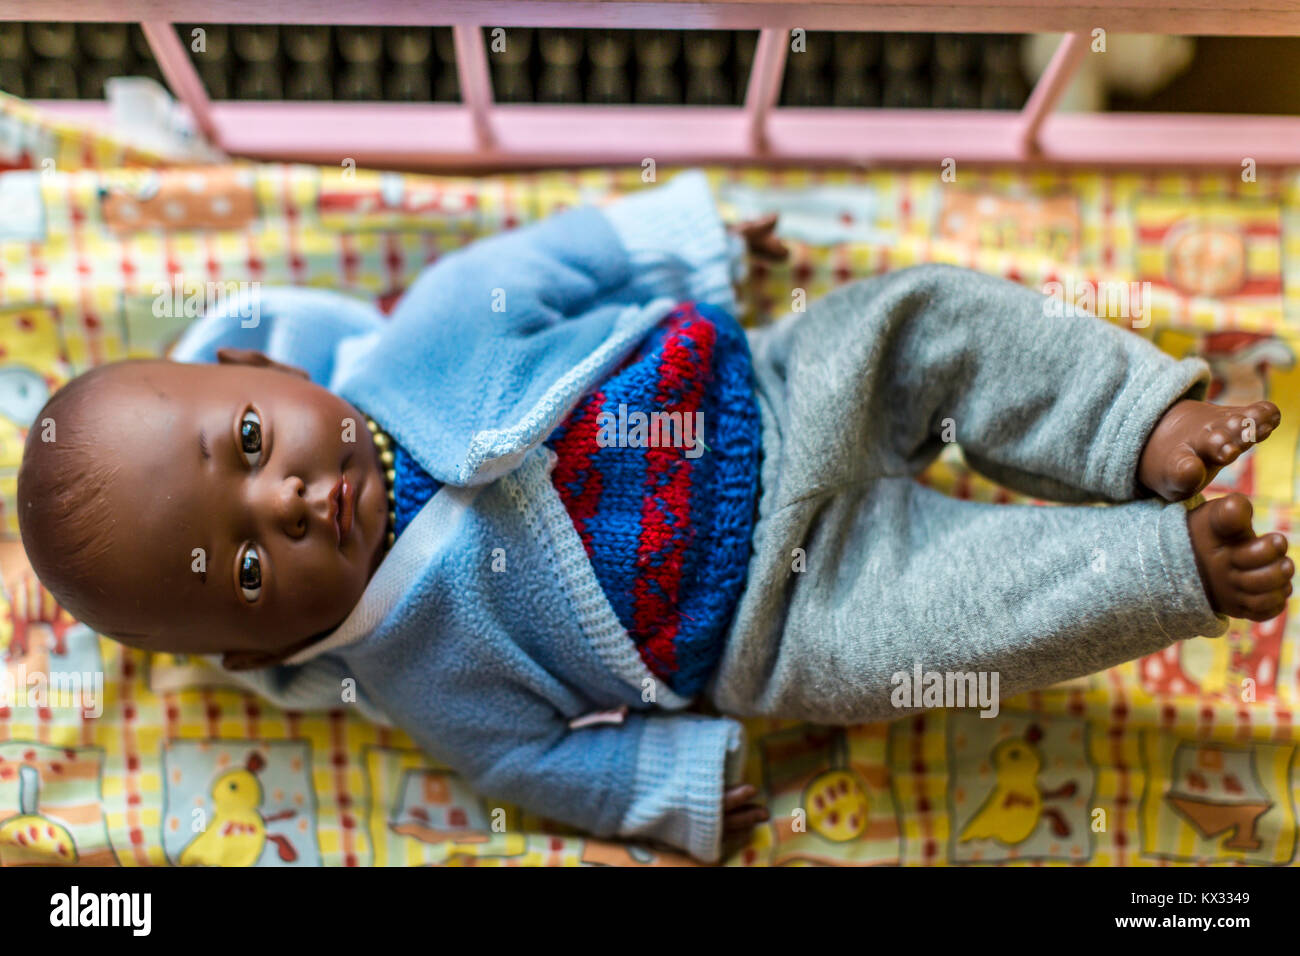 Baby doll with dark skin dressed in blue knitted clothing laying in bed Stock Photo